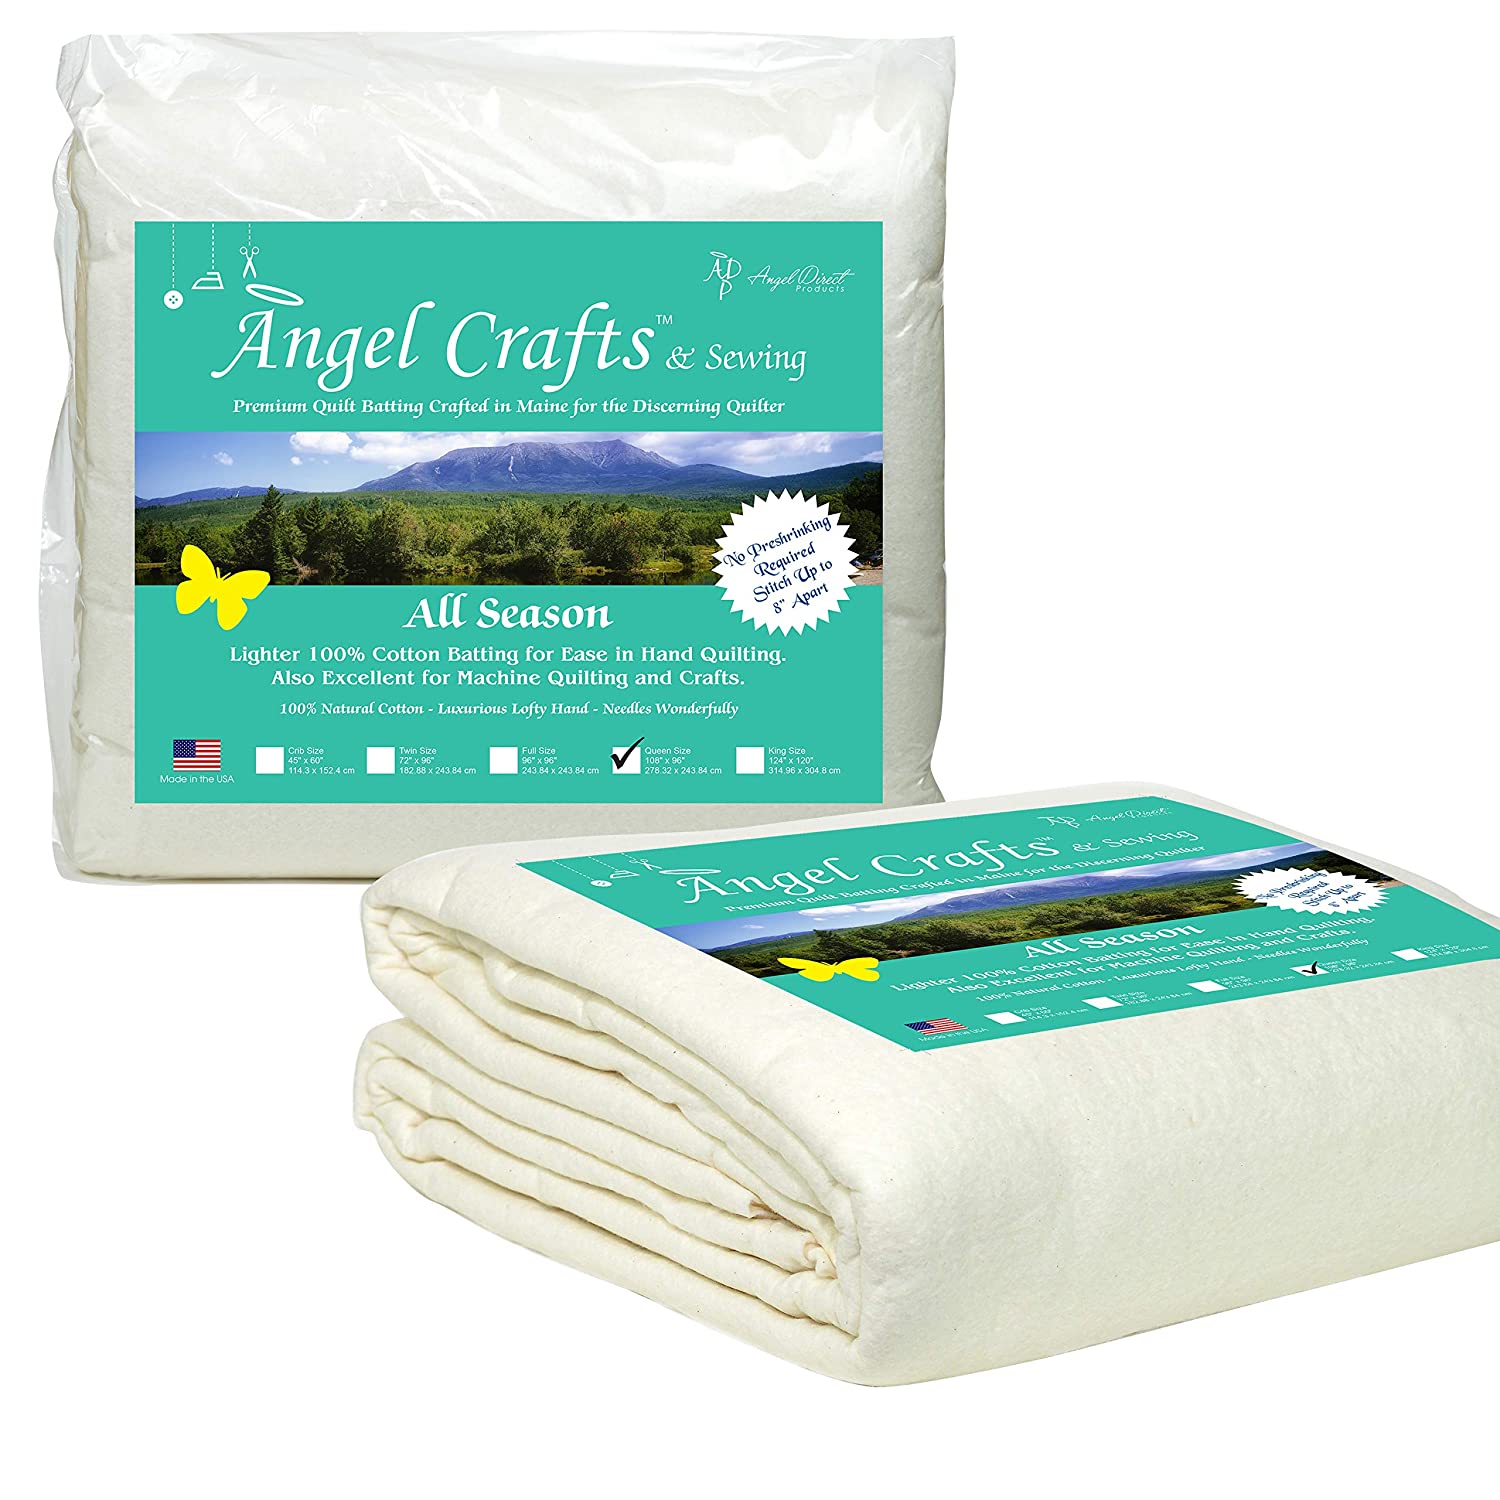 Angel Crafts and Sewing Cotton Batting for Quilts: Purely Natural All Season Quilt Batting by the Roll